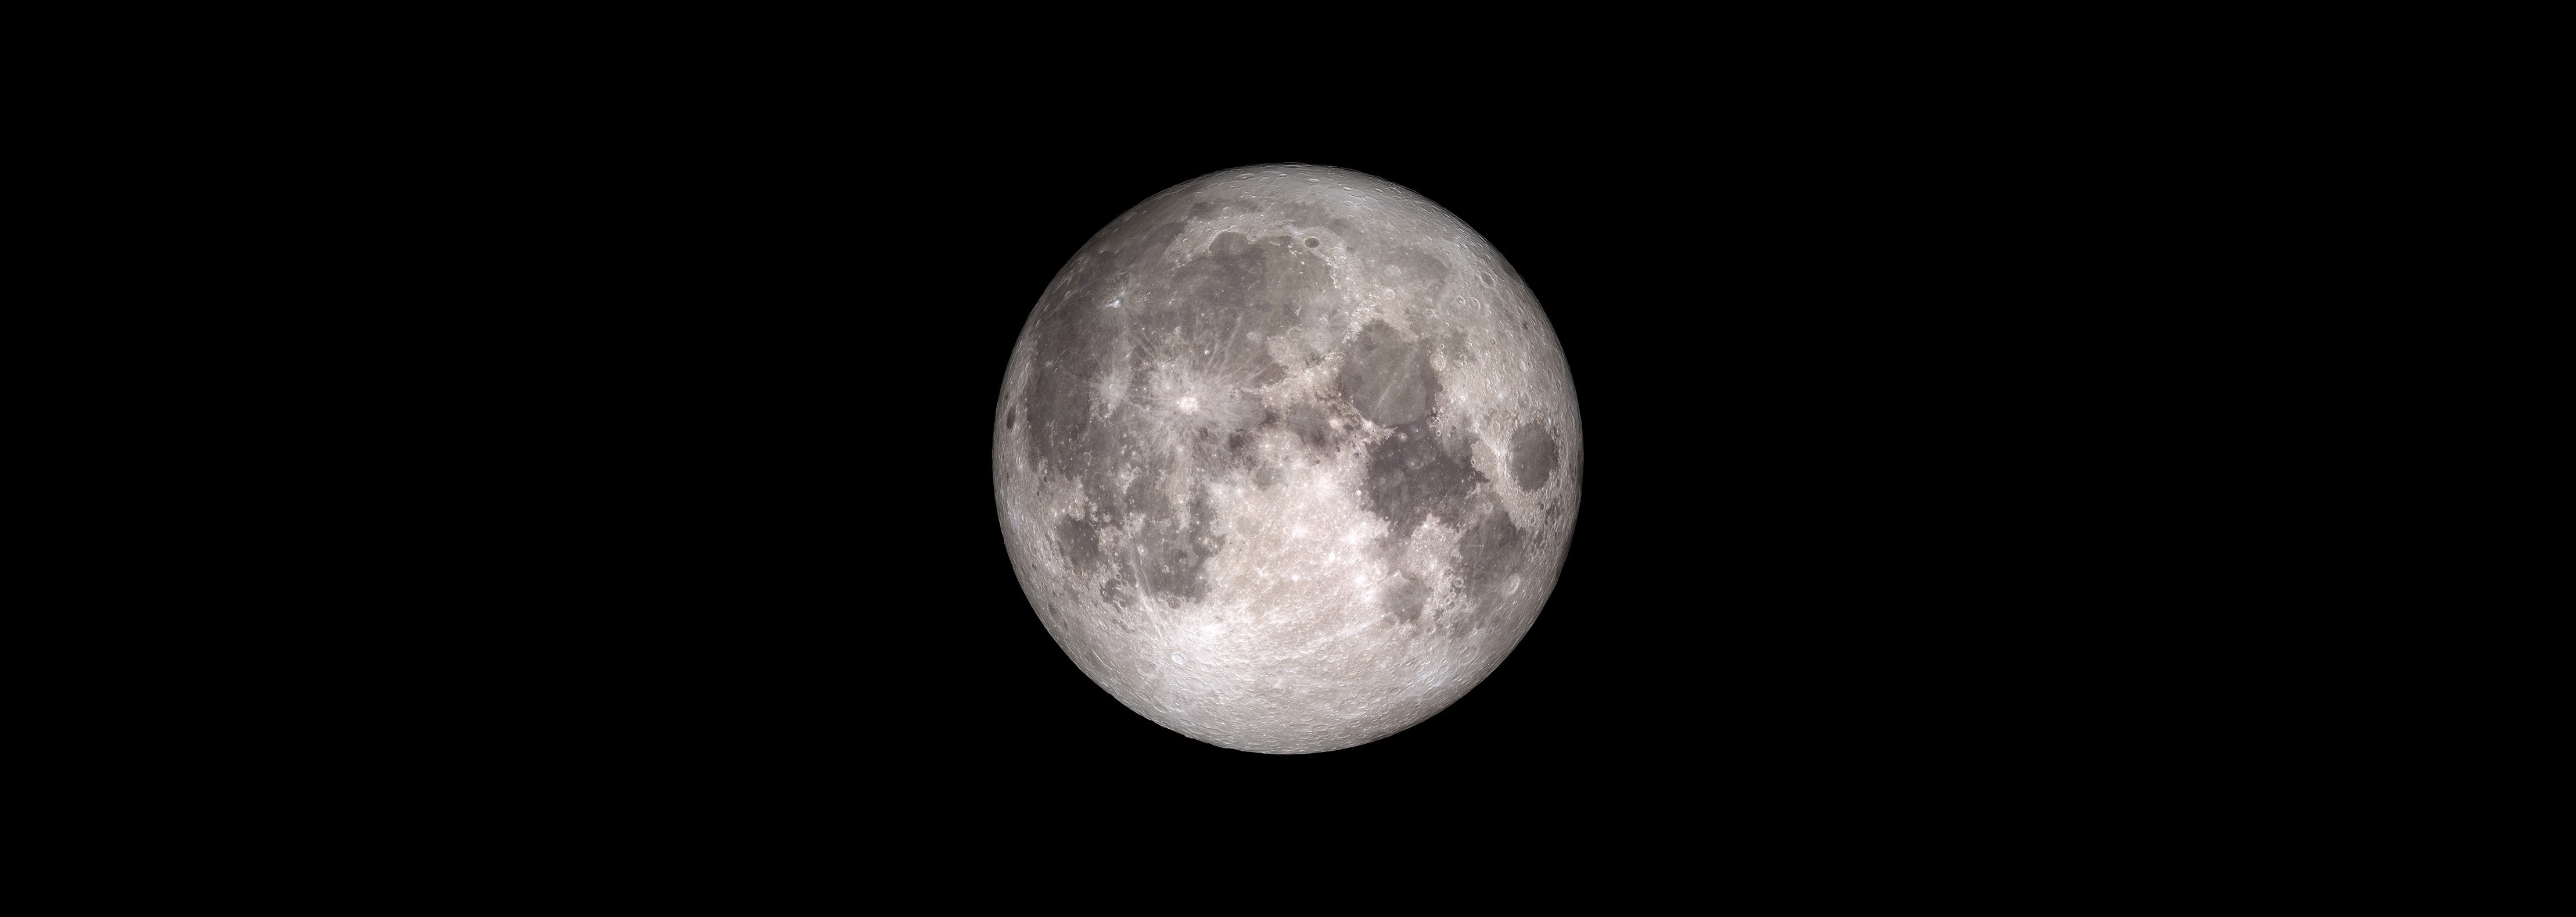 Lunar eclipse, Full Moon, Supermoon, Blue Moon, Cold Moon, Trilogy of supermoons, Earth, NASA, Science and Technology news